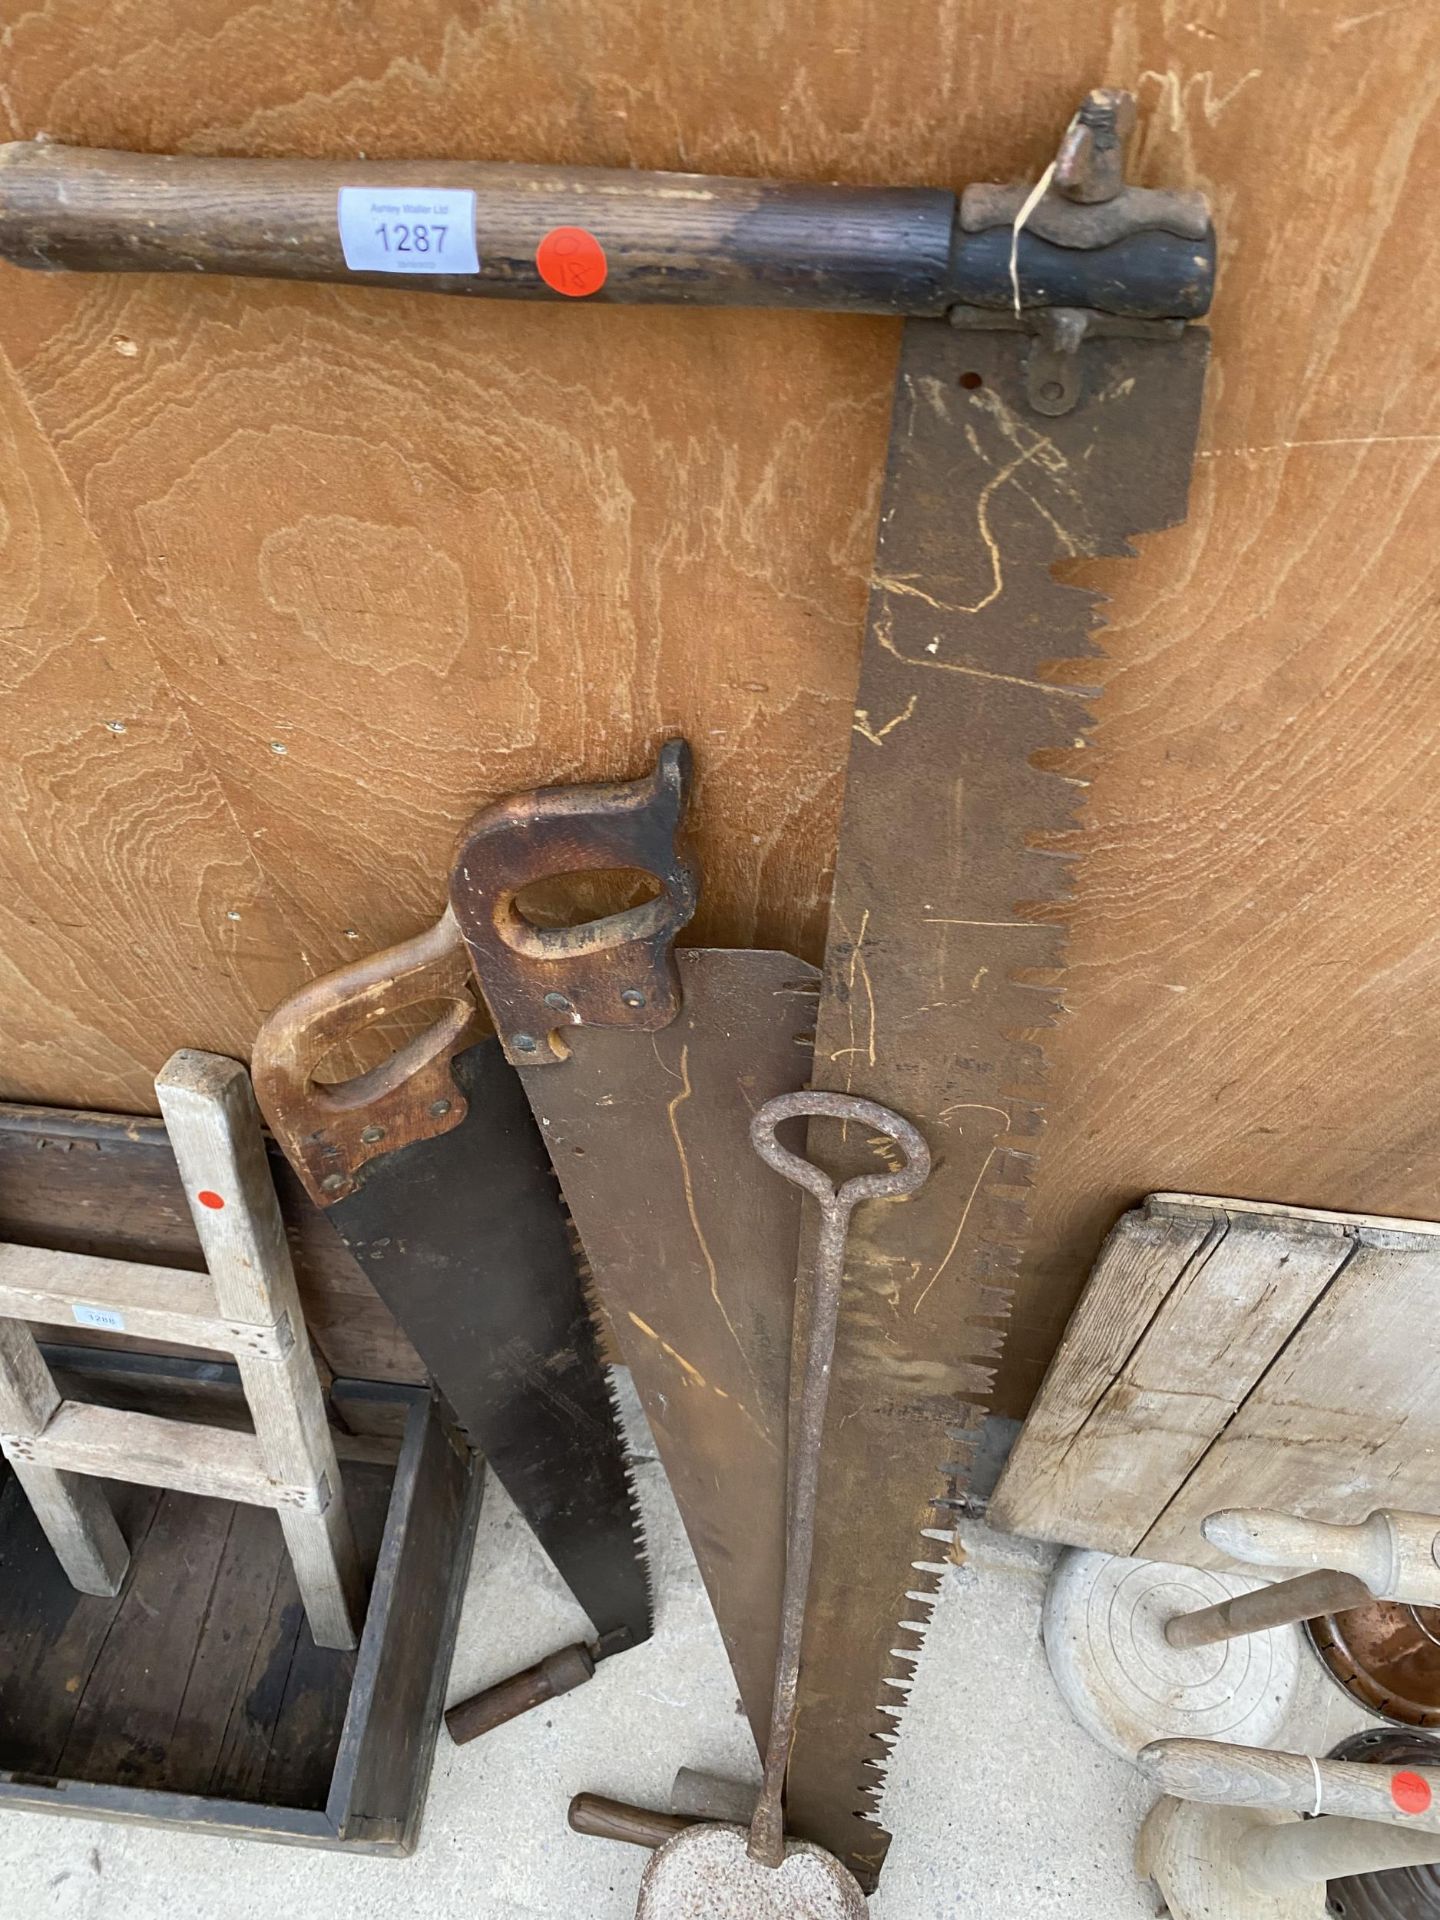 THREE VINTAGE CROSS CUT SAWS AND A VINTAGE CAST IRON DOUGH SHOVEL - Image 4 of 4